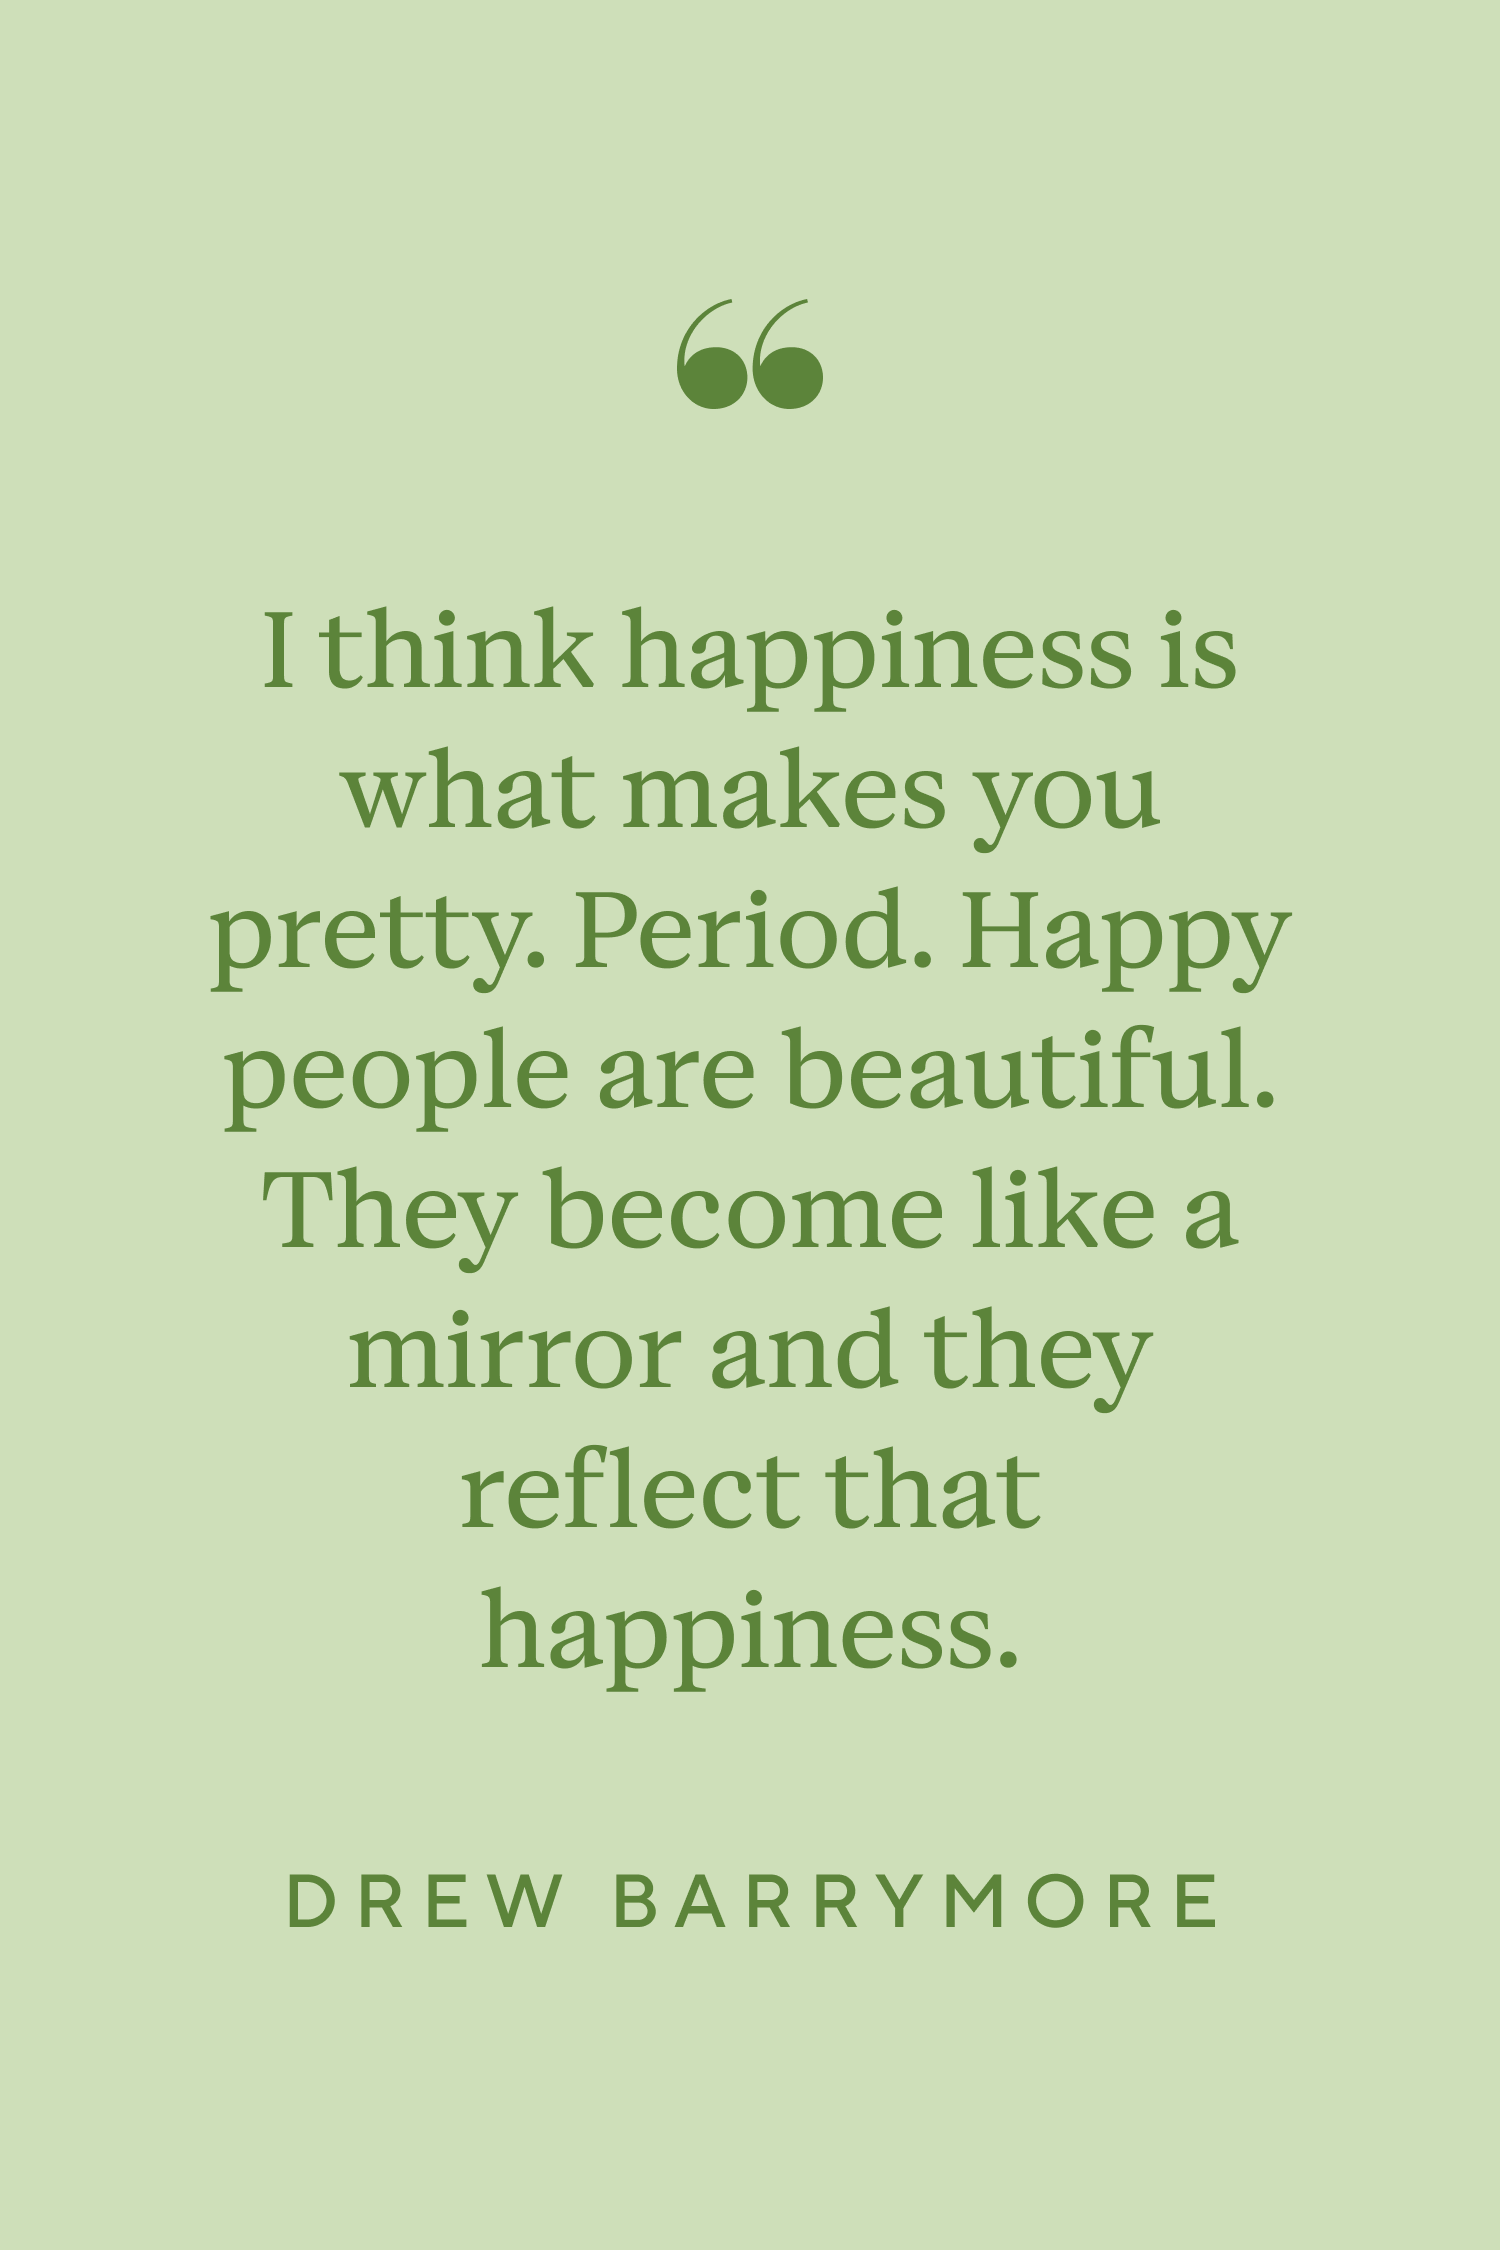 cute short quotes about happiness